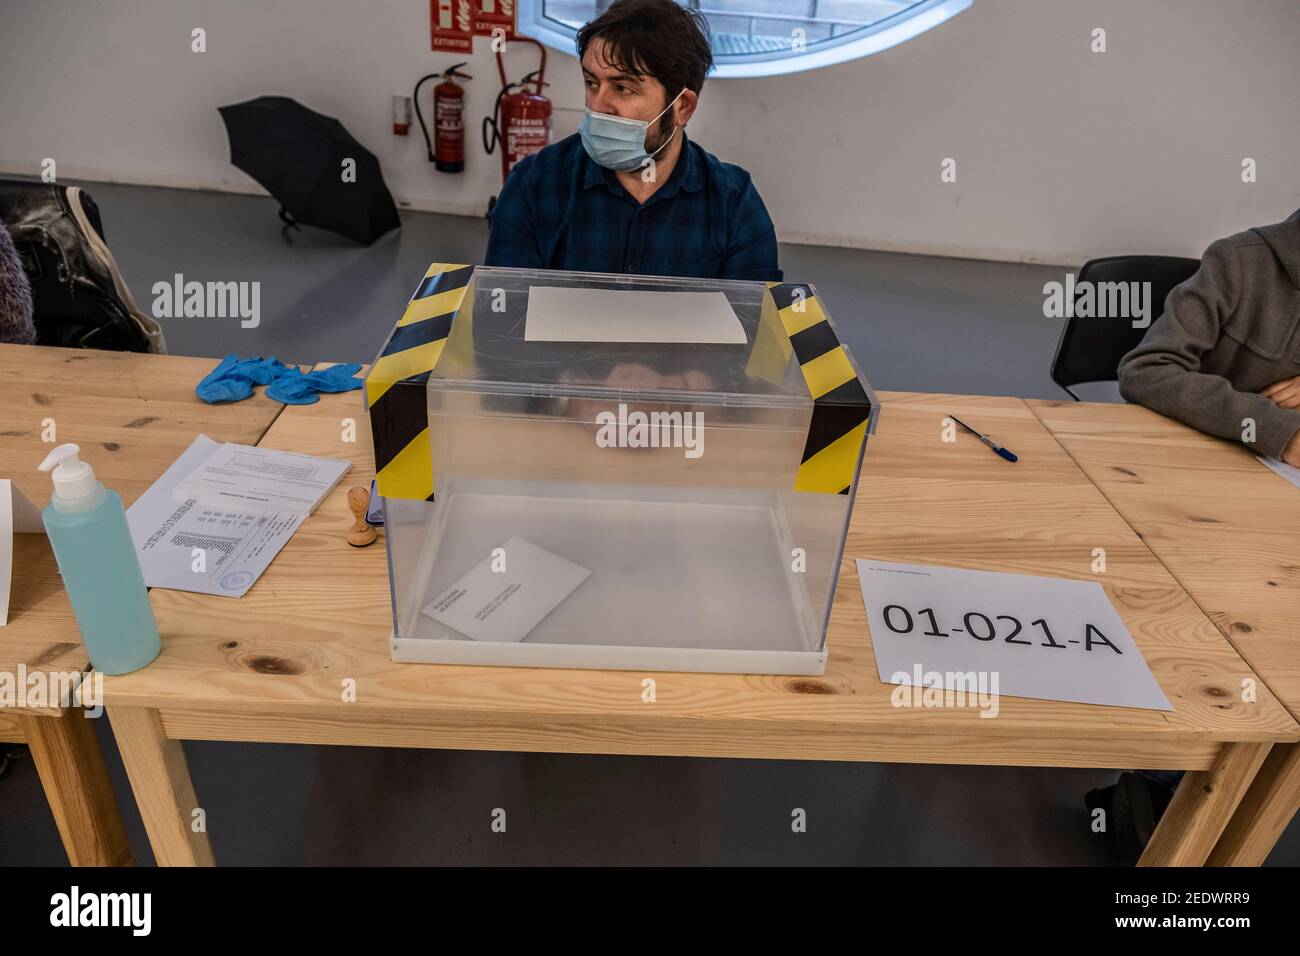 View of a ballot box at the CCCB electoral college during the Regional Elections.In Spain’s separatist region of Catalonia, the regional parliamentary election has been held. The vote has resulted in an increase of parliamentary seats to pro-independence parties. Stock Photo